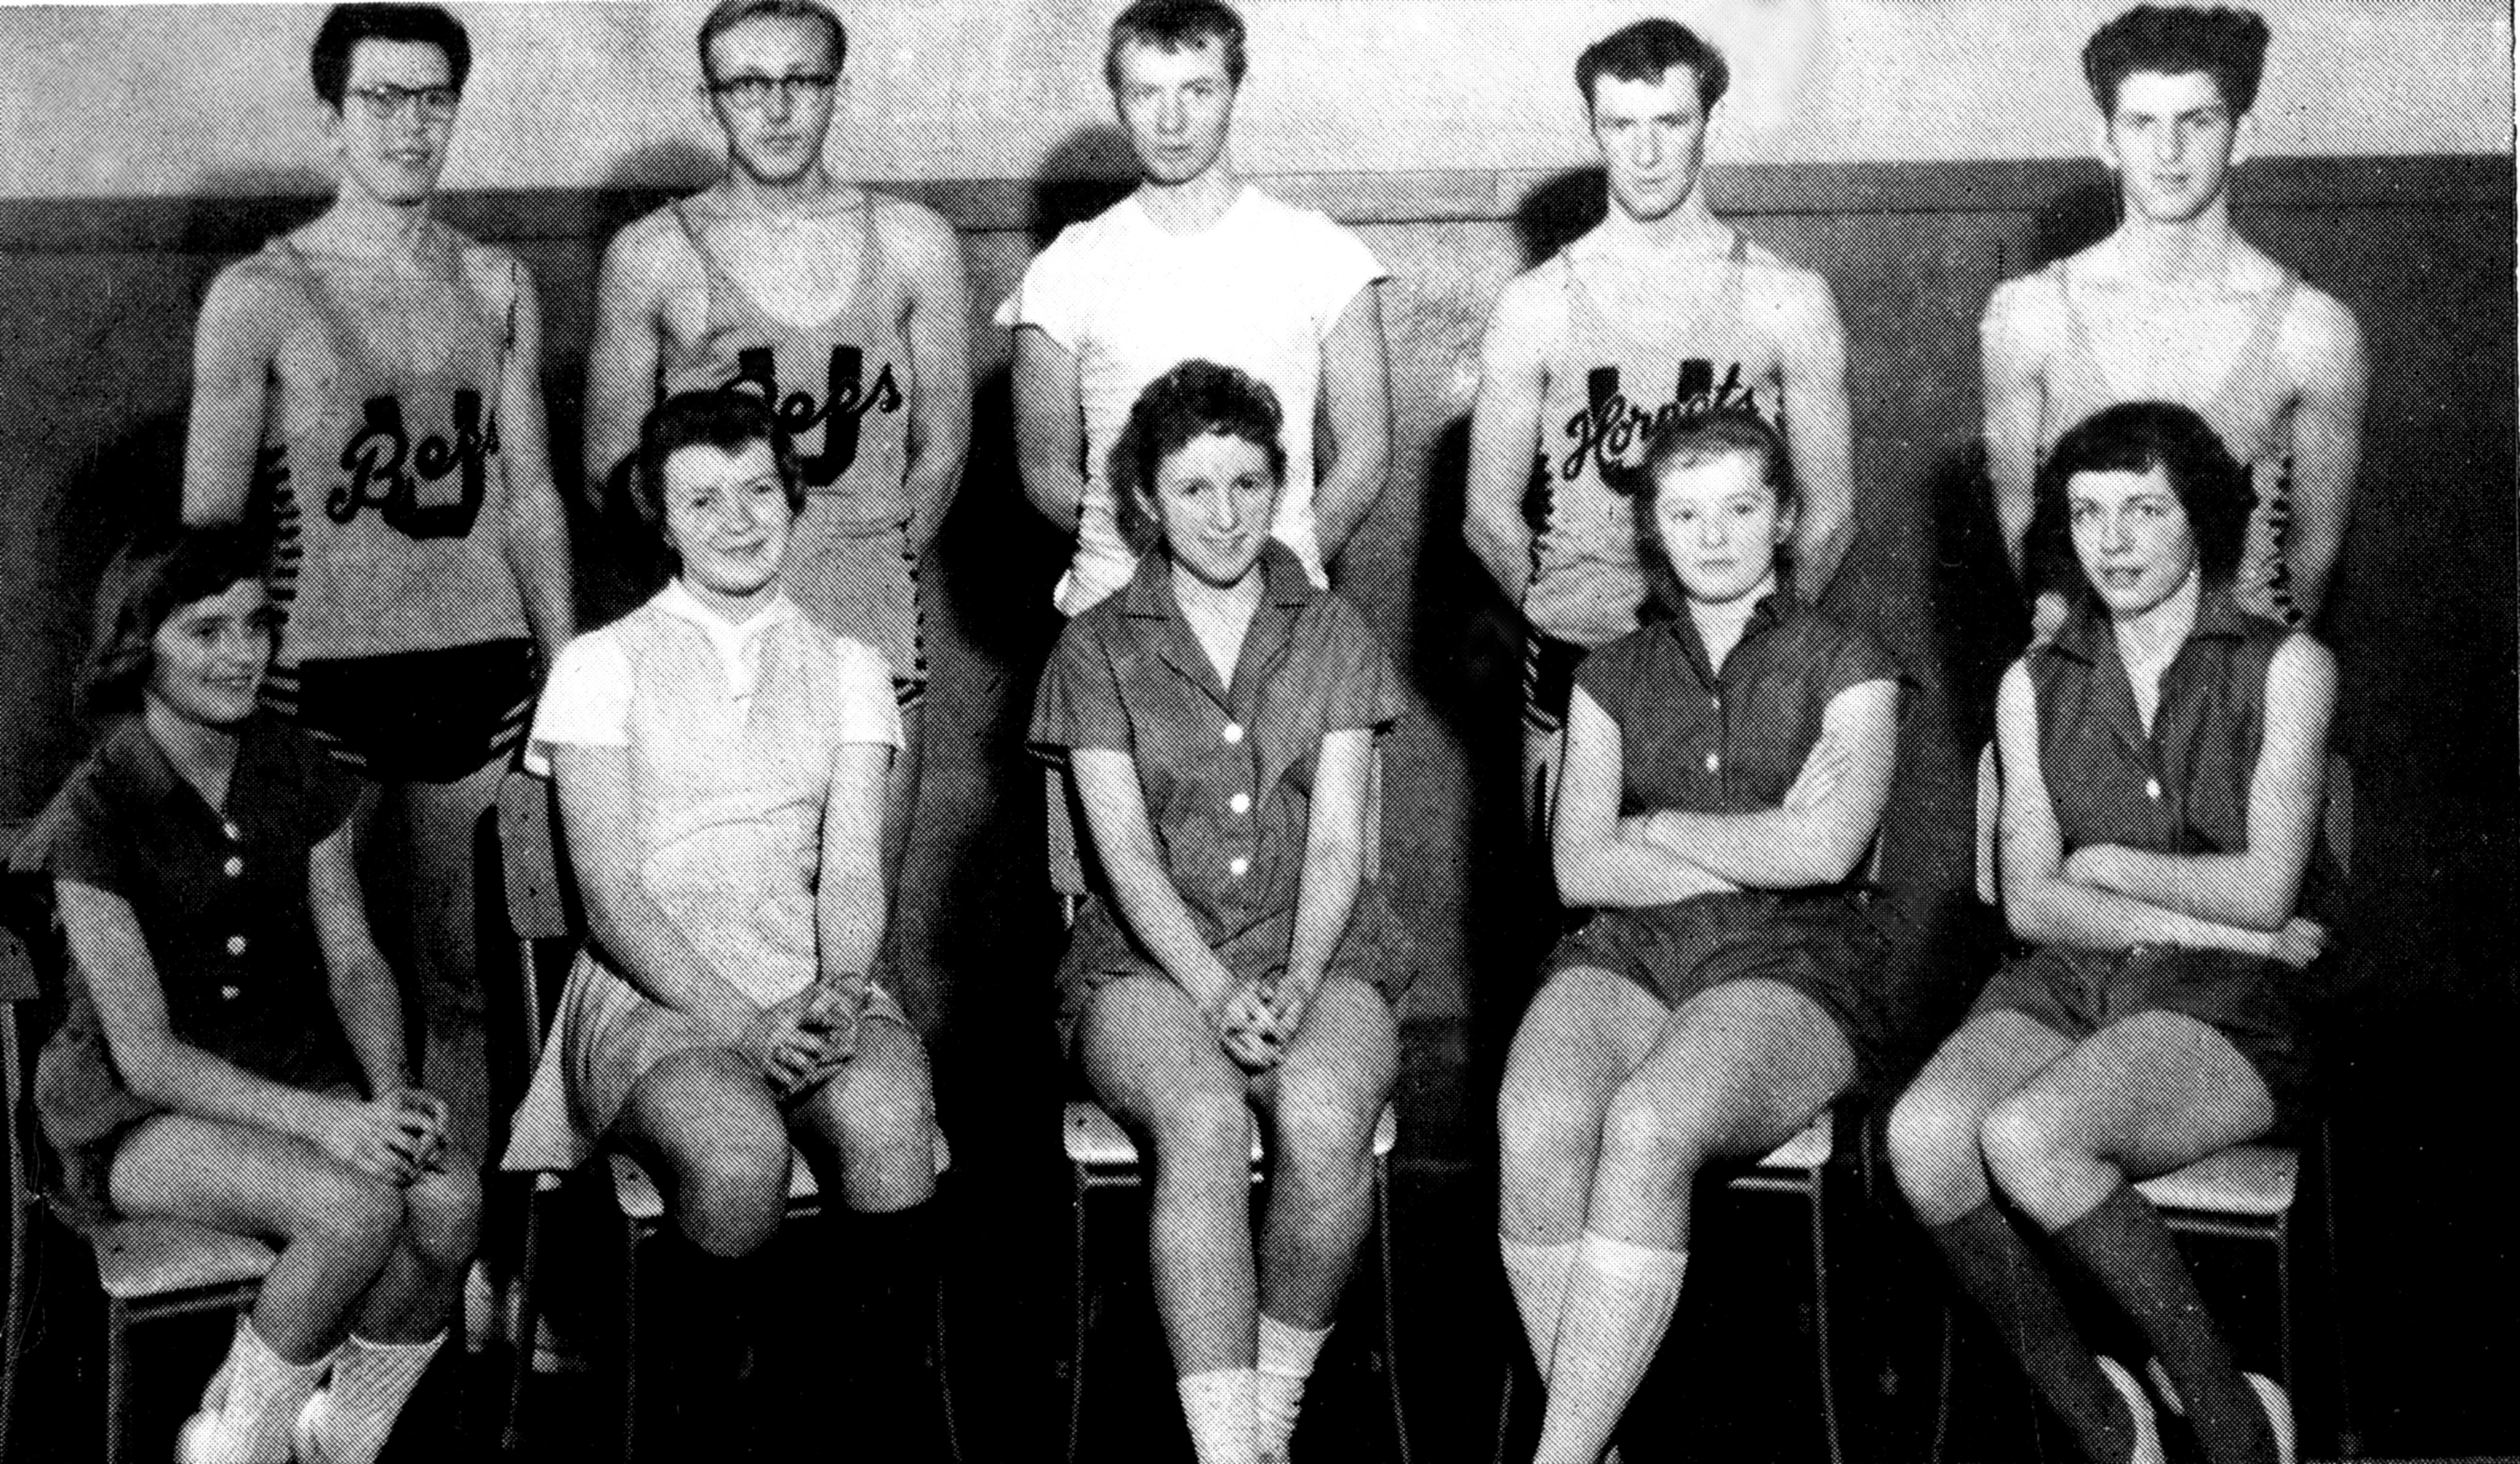 (Click to magnify)  FRONT ROW:  M. Welsh, Mildred Lickiss, G. Wagg, D. Taylor
BACK ROW:  Derek Arbuckle, David Whitney, M. Ritchie, C. Todd, Keith Cornell
(Abs)  B. Hall, Peter Bernhardt